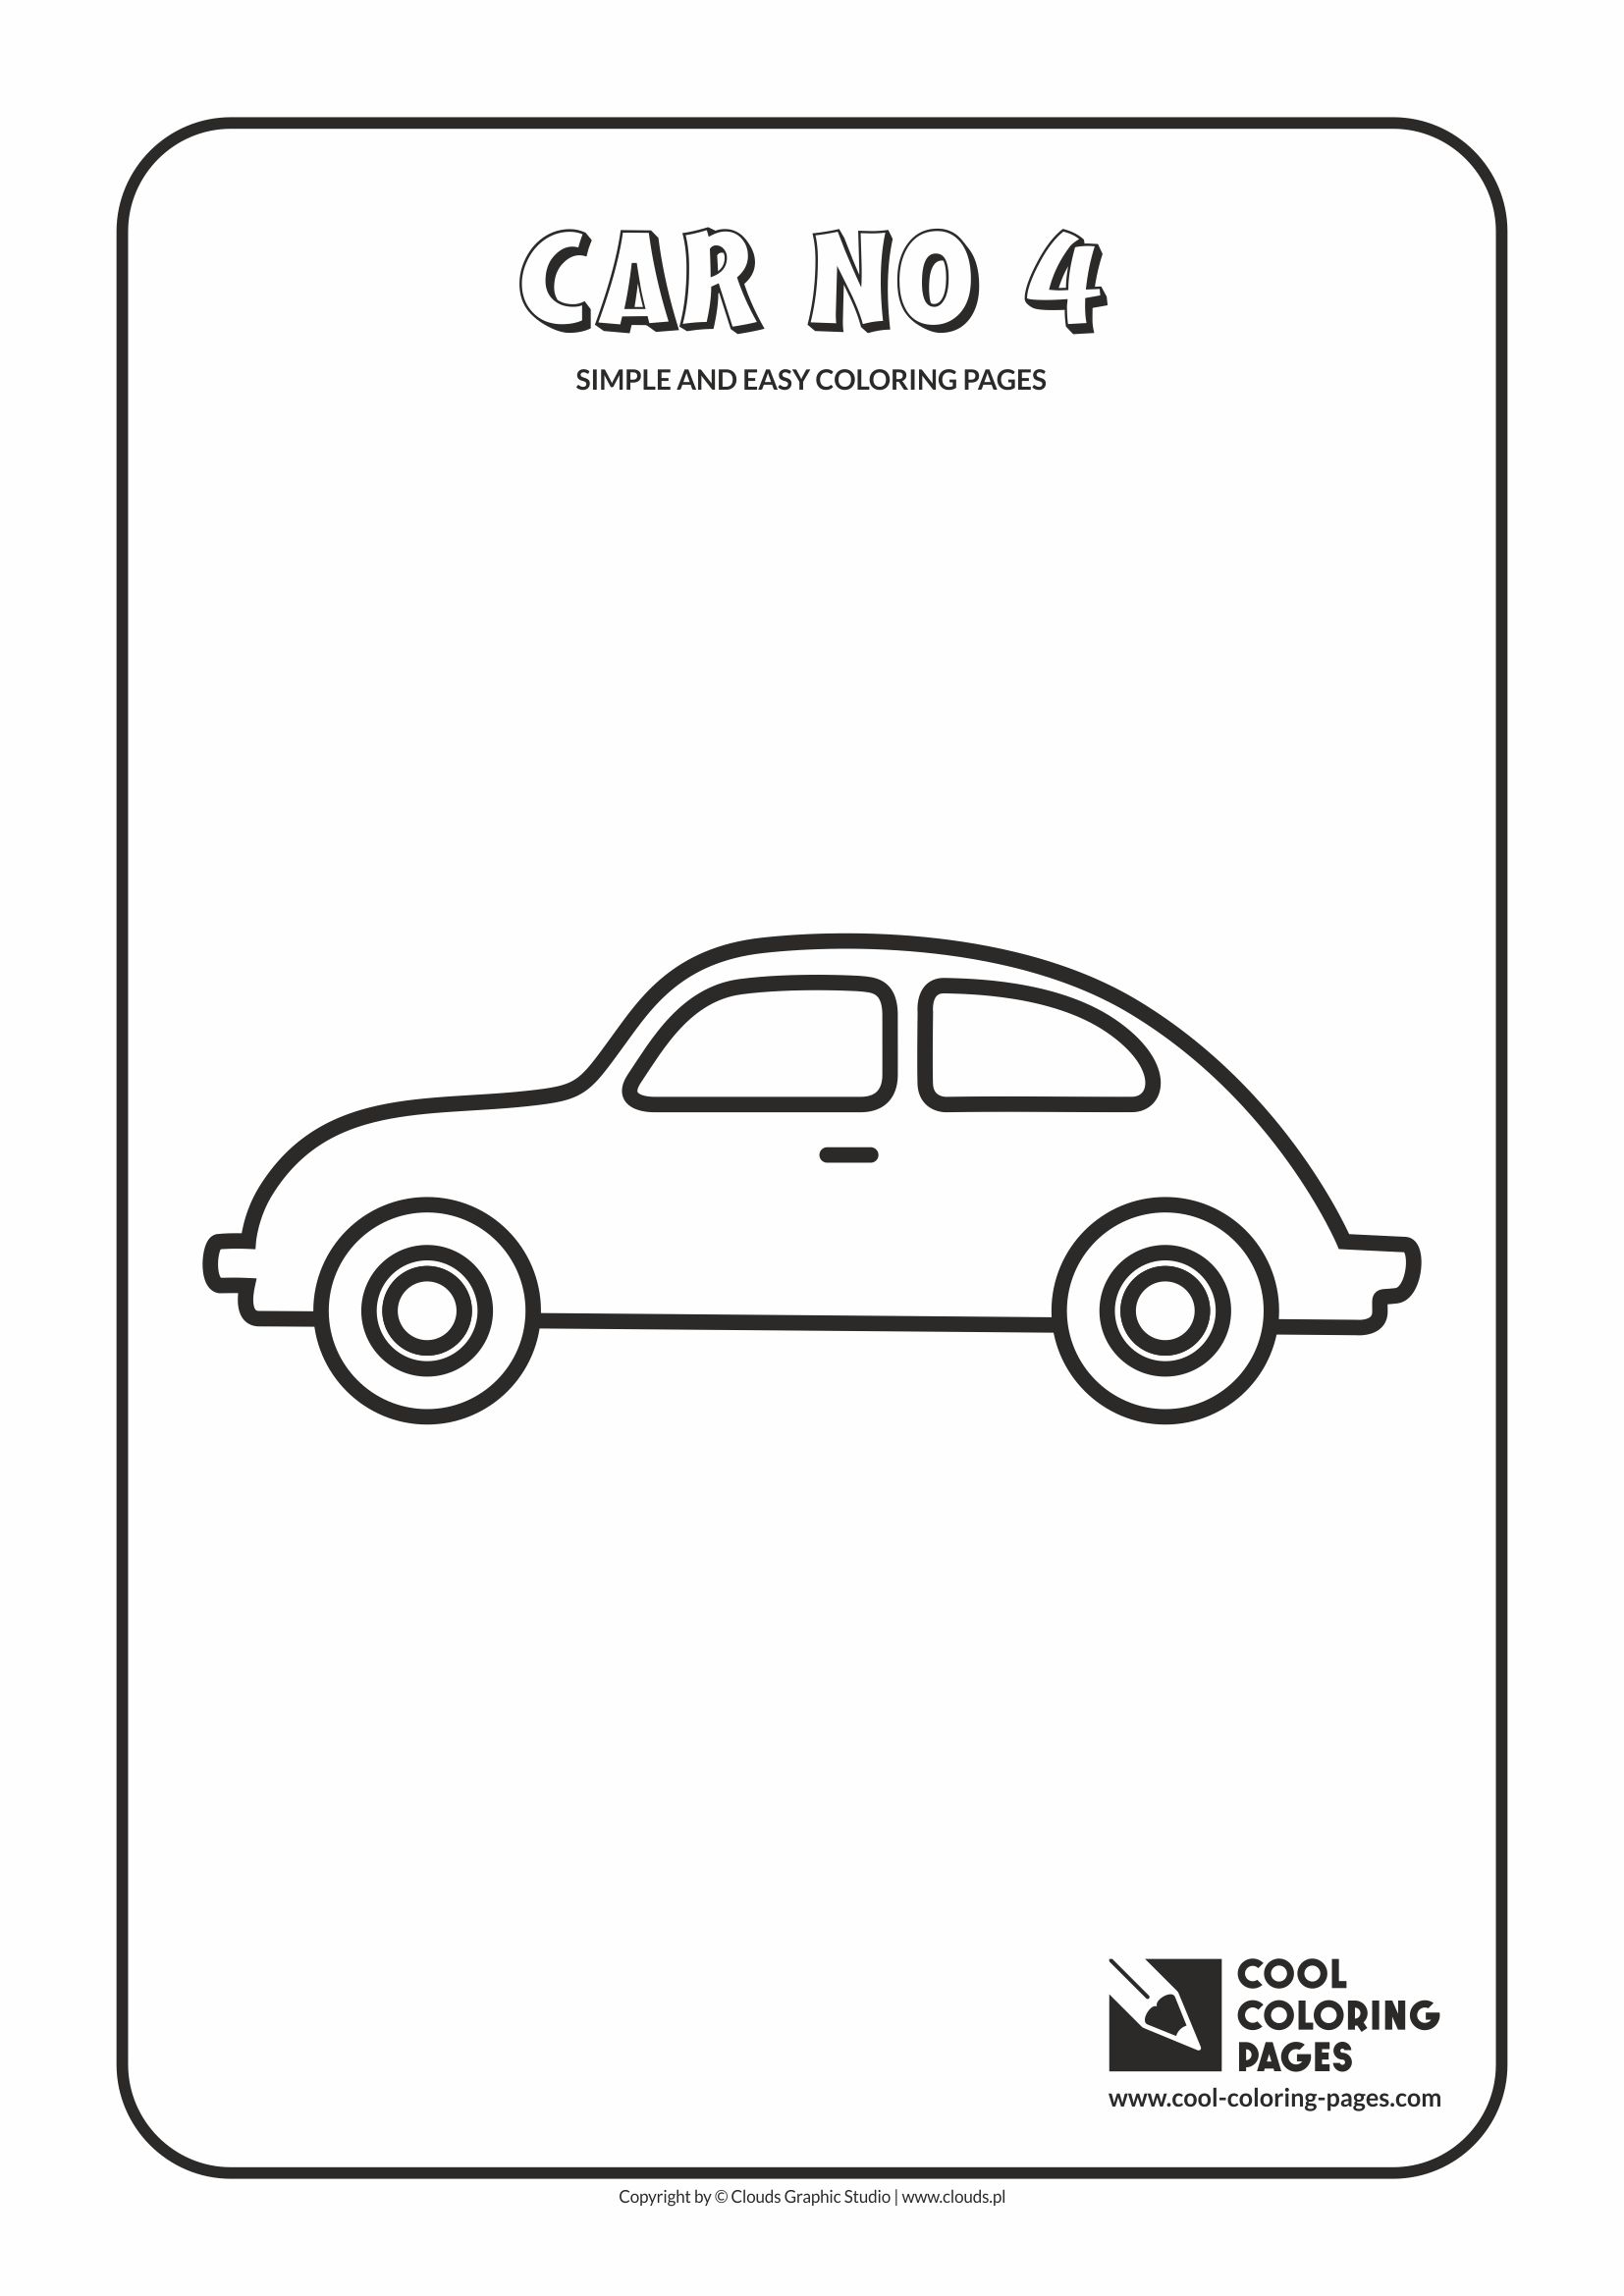 Simple and easy coloring pages for toddlers - Car no 4